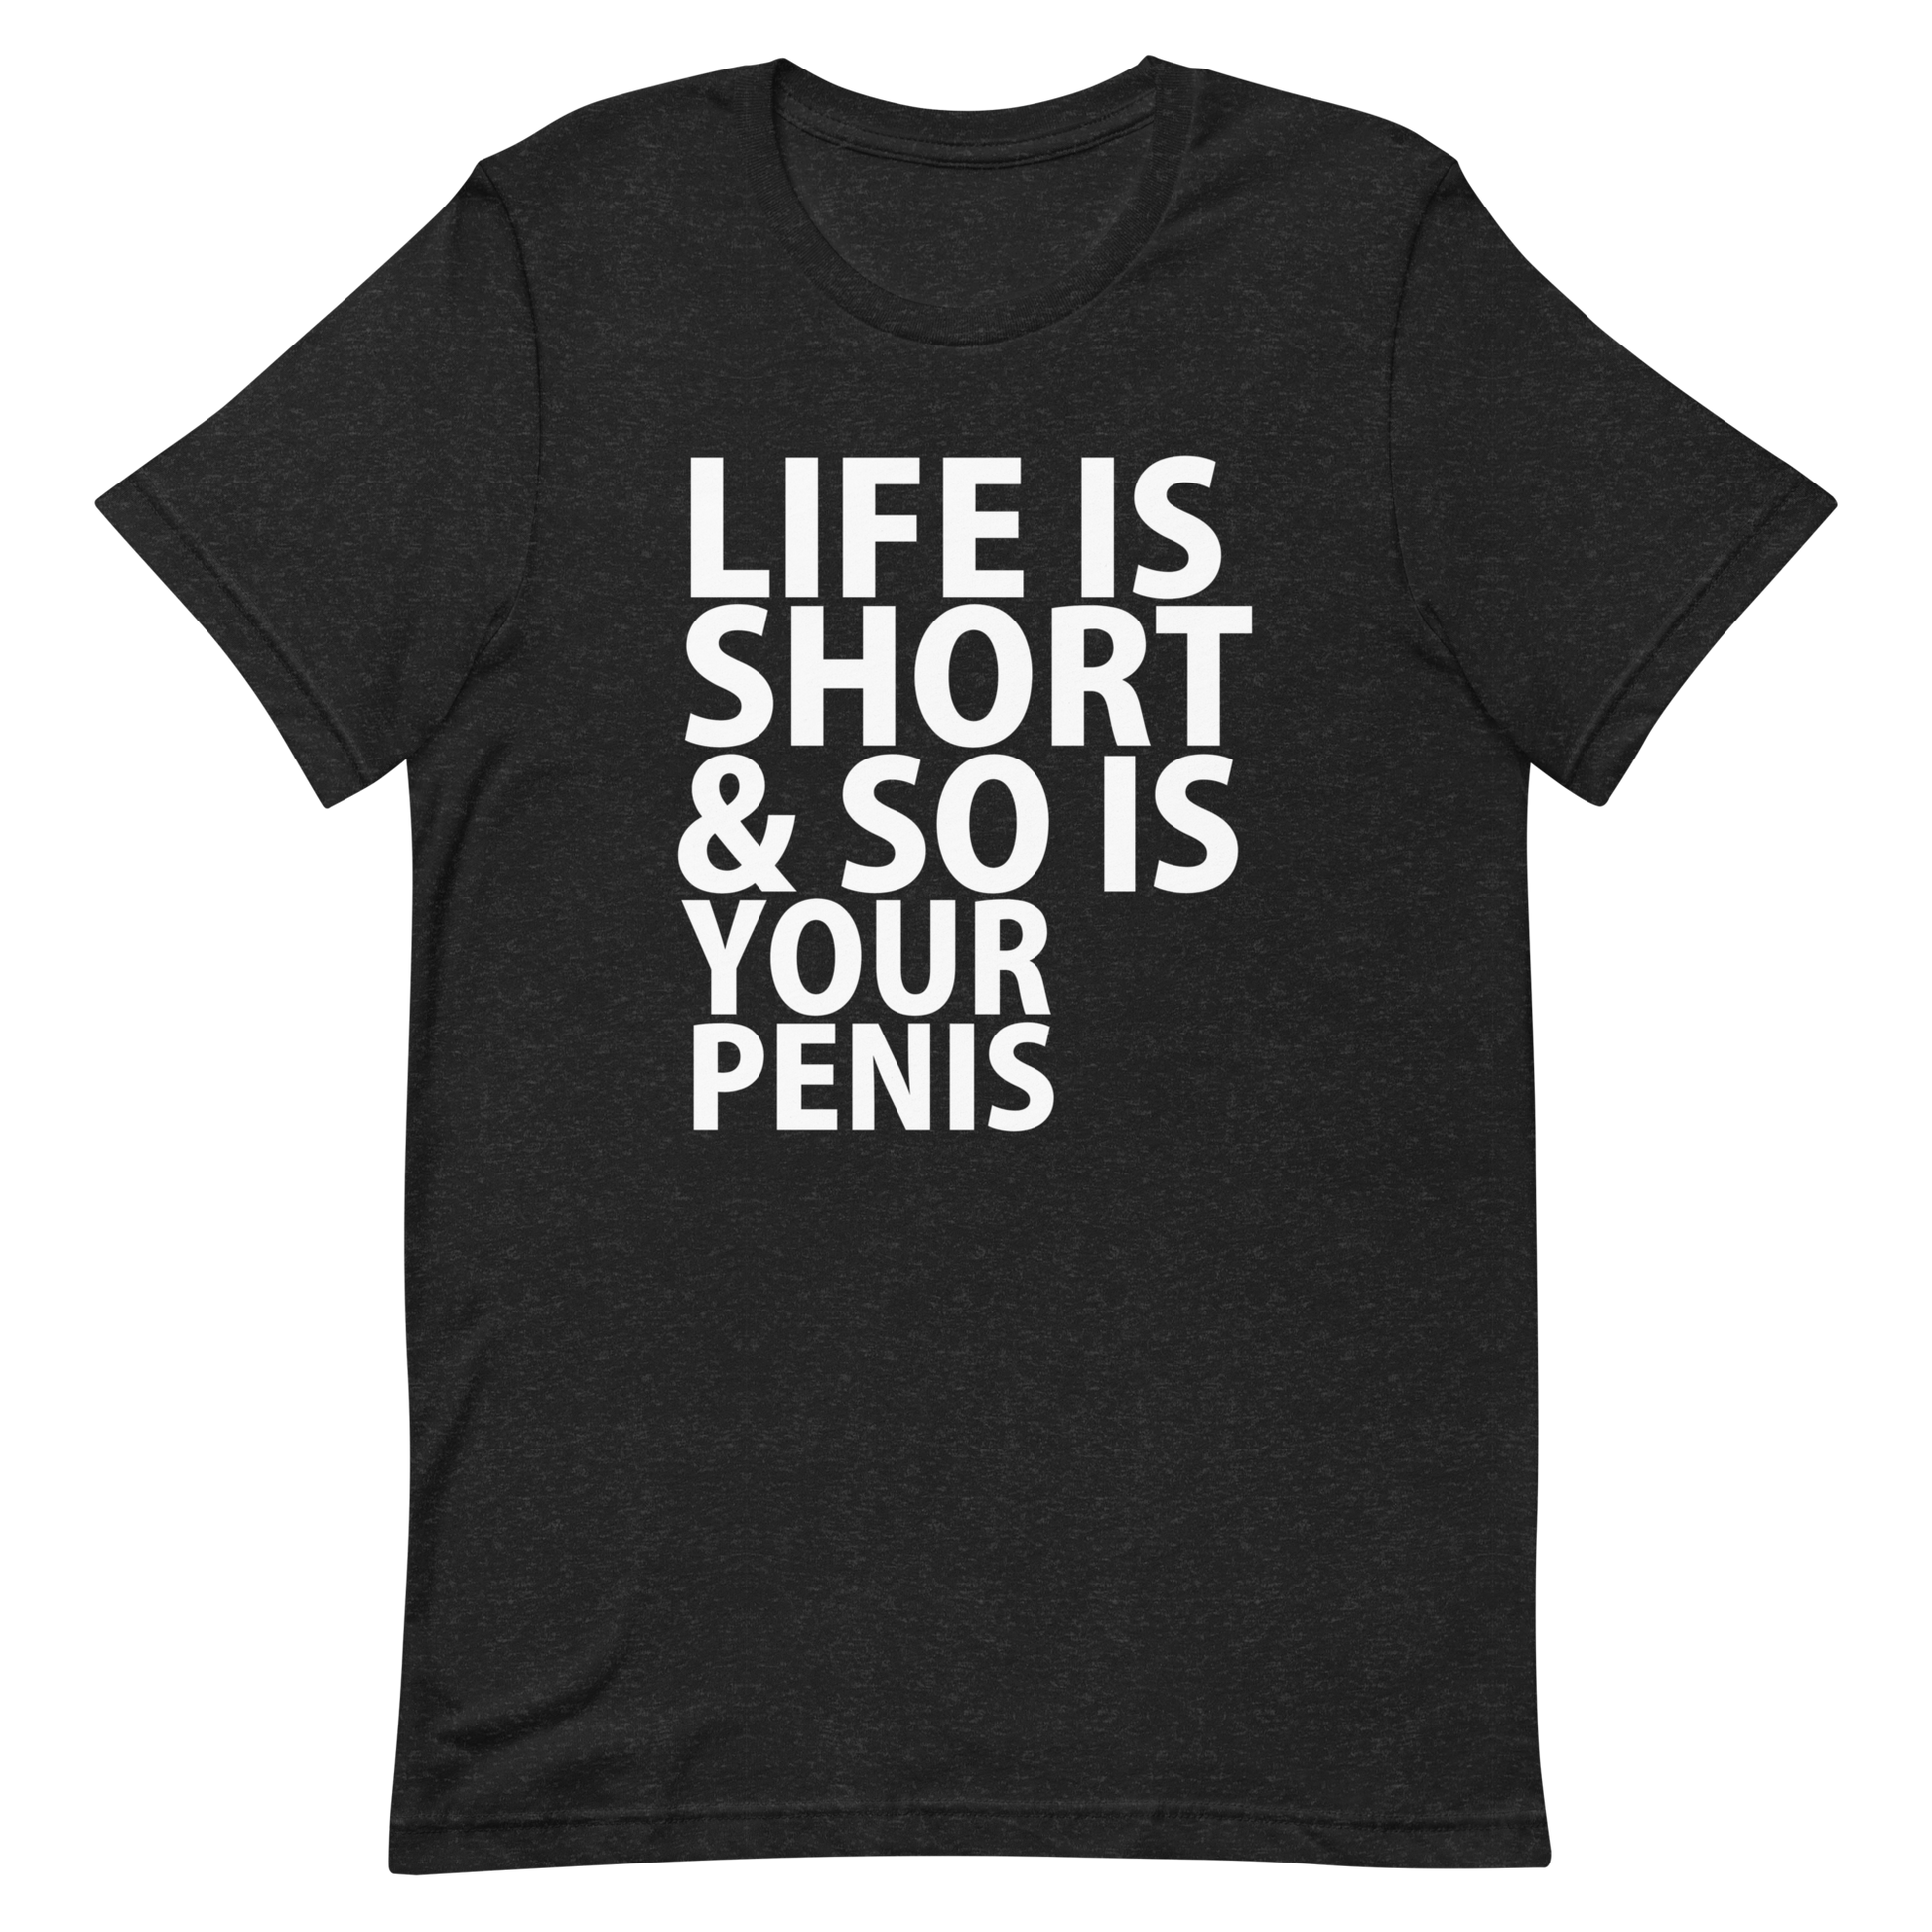 Life Is Short & So Is Your Penis T-Shirt - Black Heather